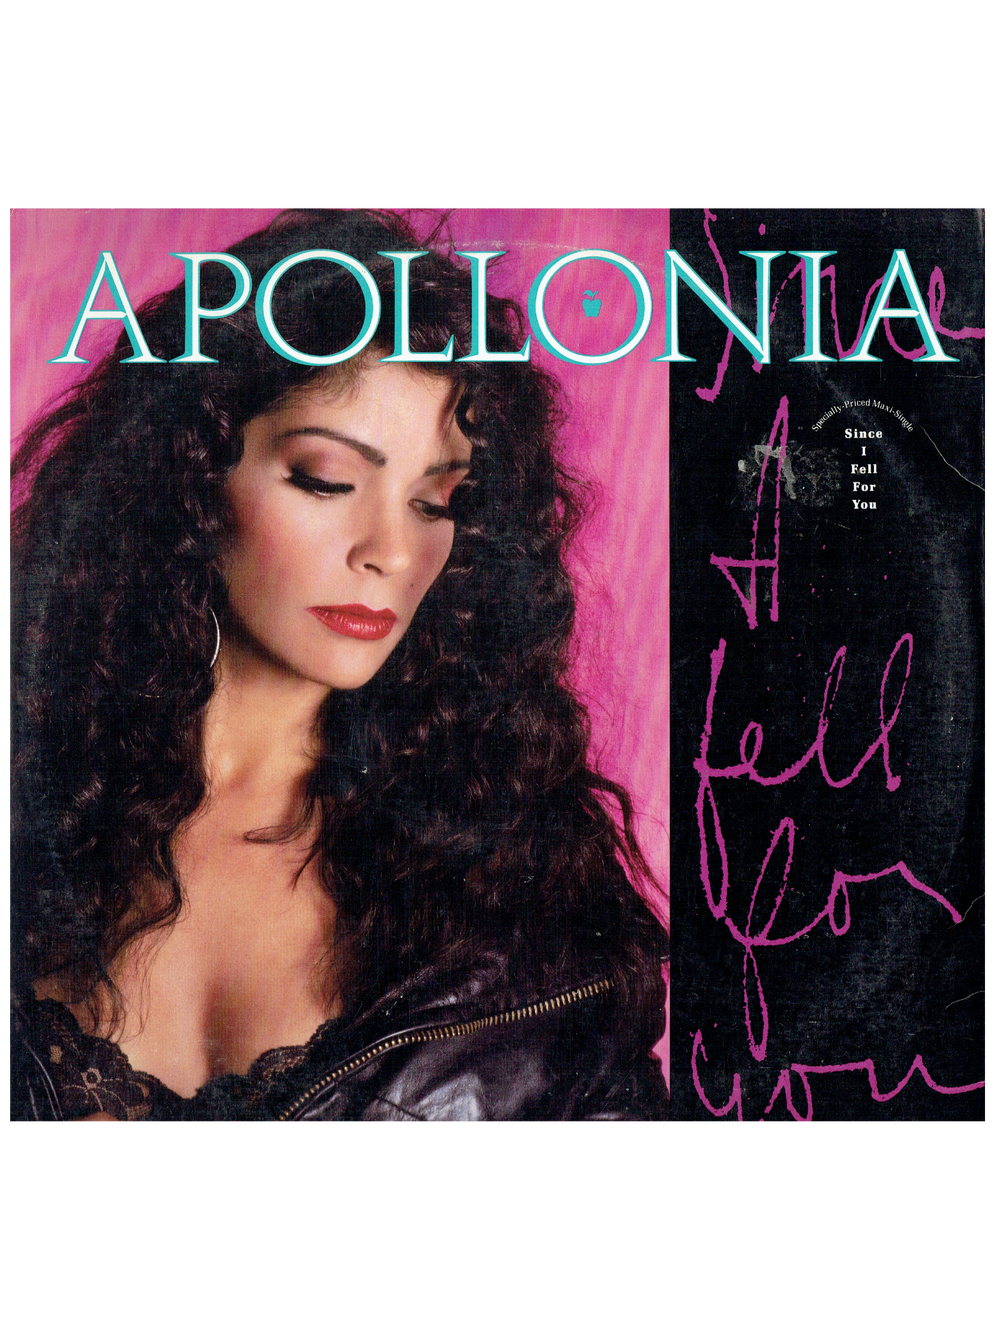 Apollonia Since I Fell For You 12 Inch Vinyl USA Prince